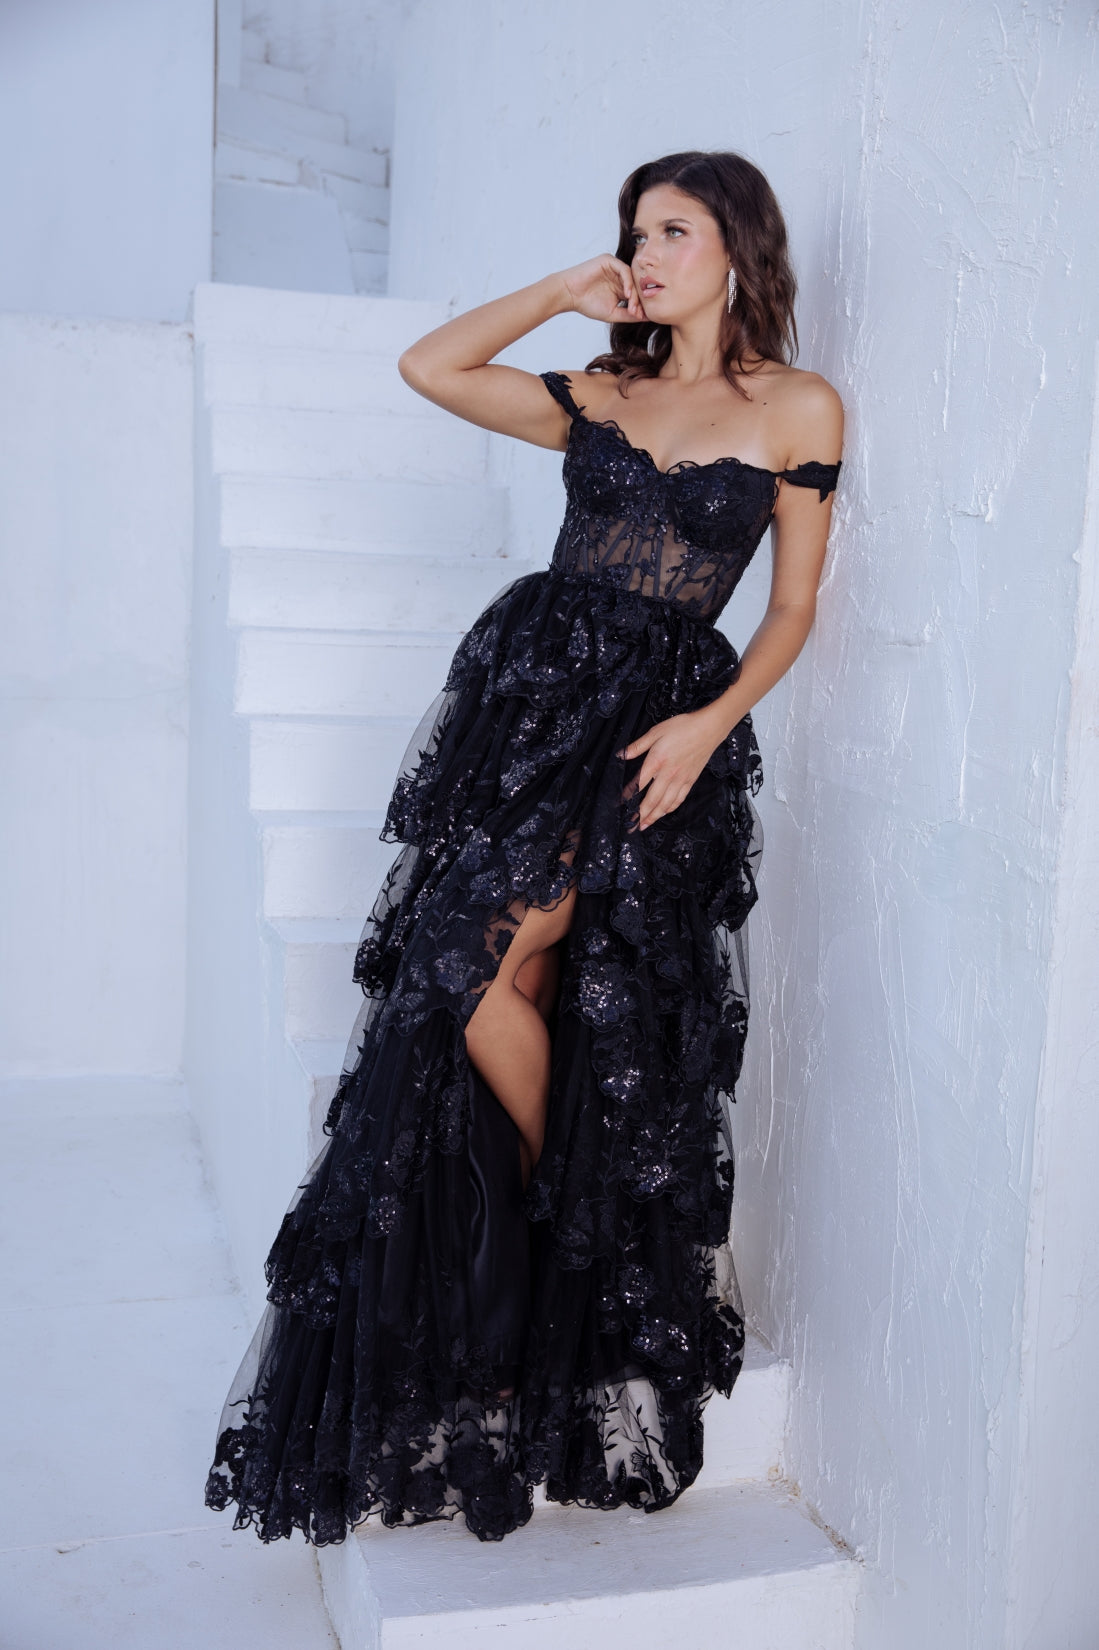 Broad Shoulder Style Prom Dress, Square Shoulders Homecoming Gown